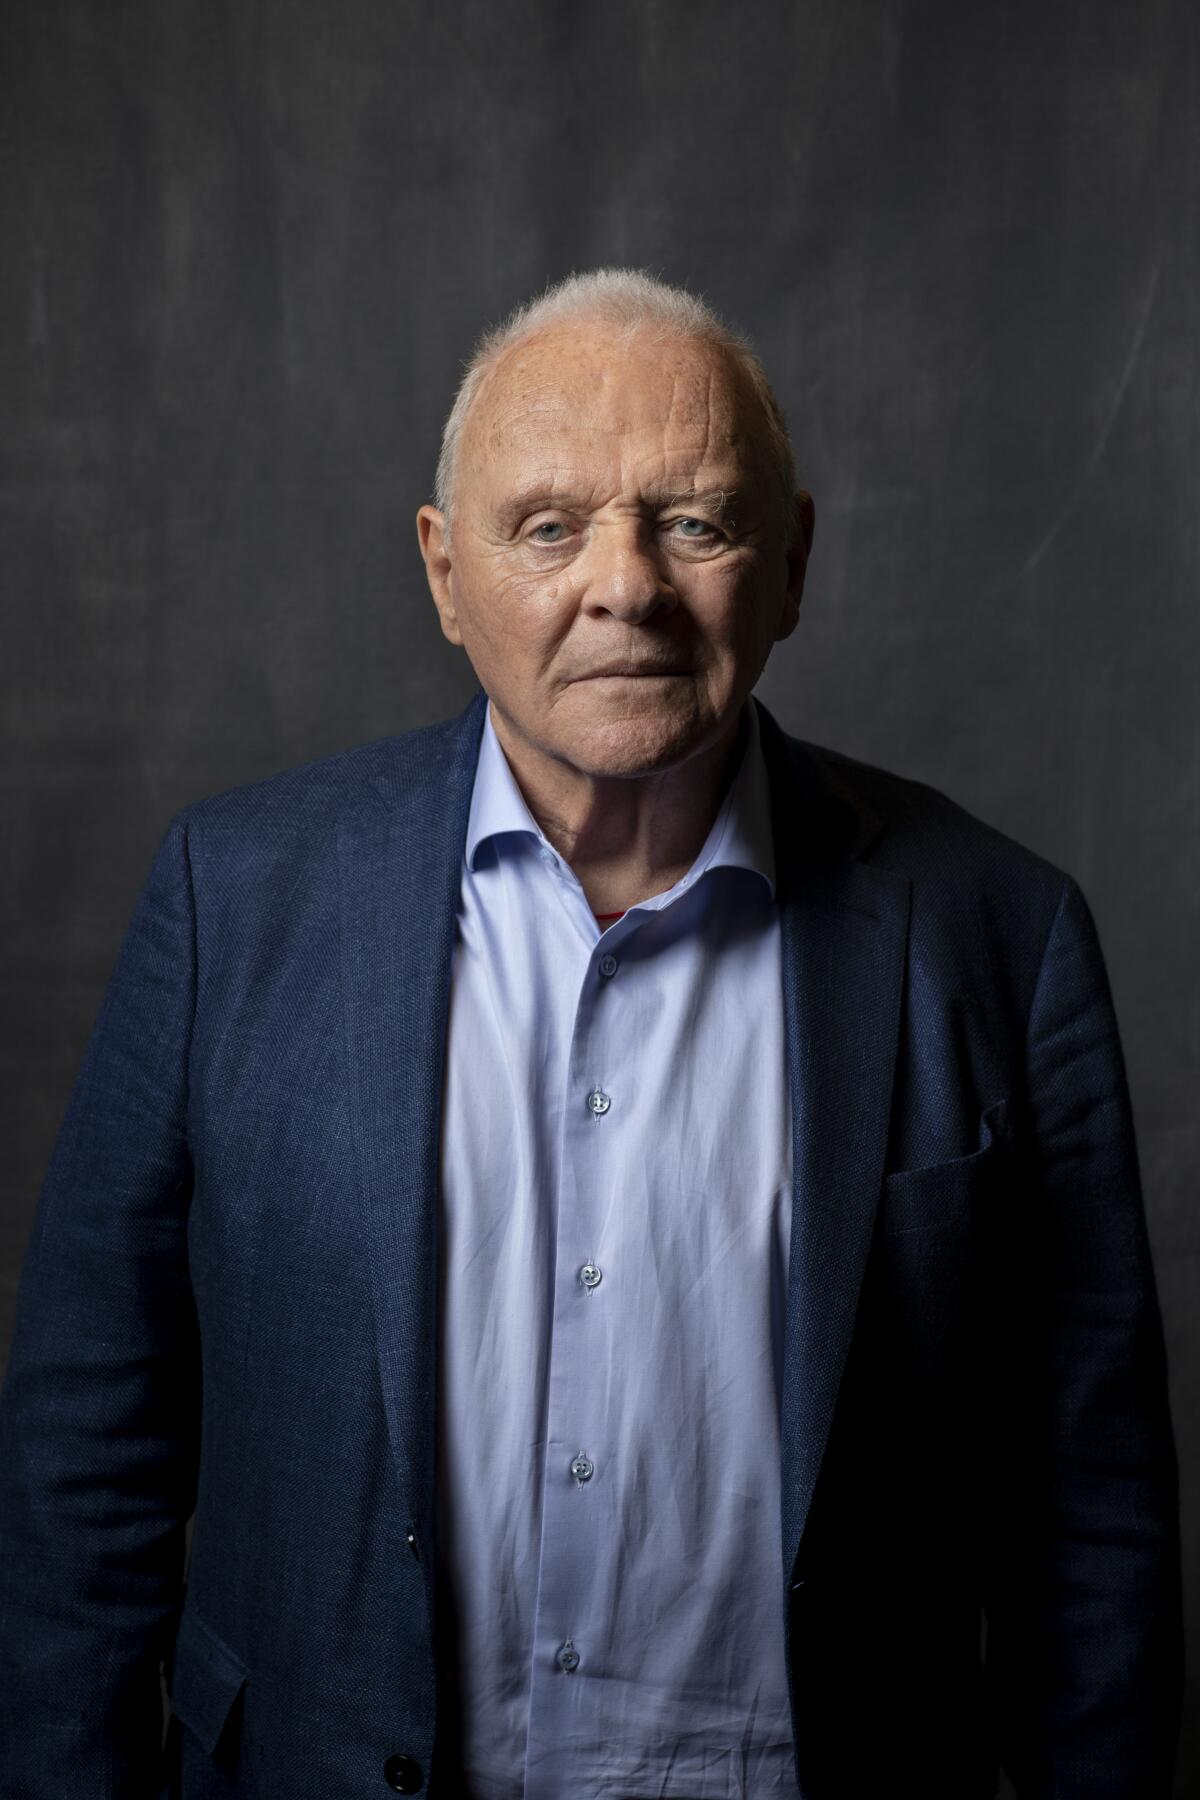 Oscars 2021: In a surprise, Anthony Hopkins wins best actor for